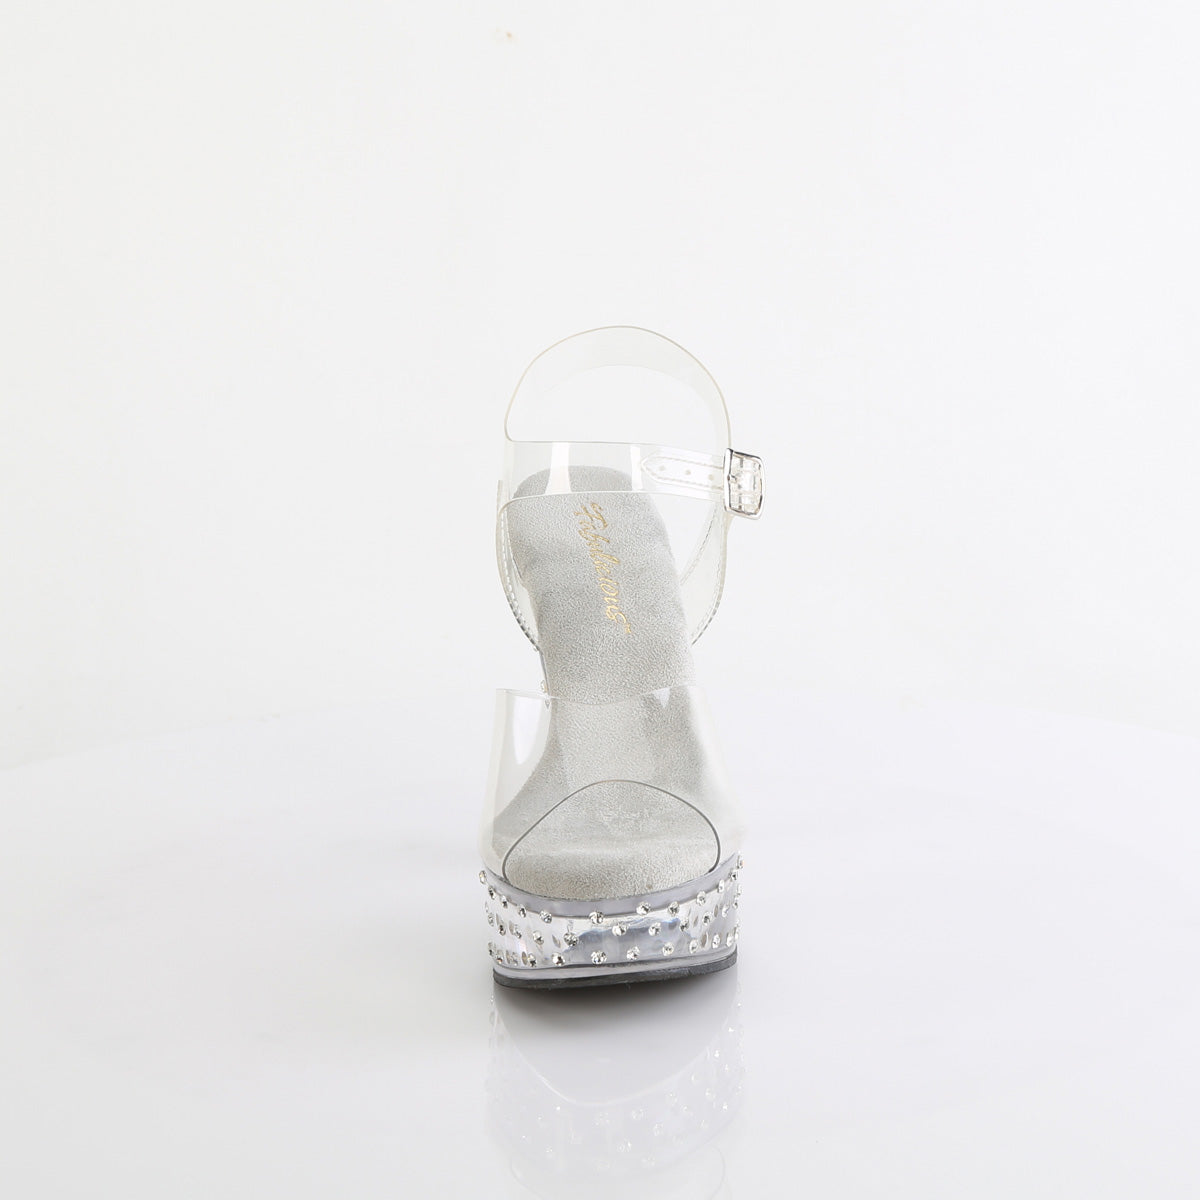 5 Inch Heel MARTINI-508SDT Clear